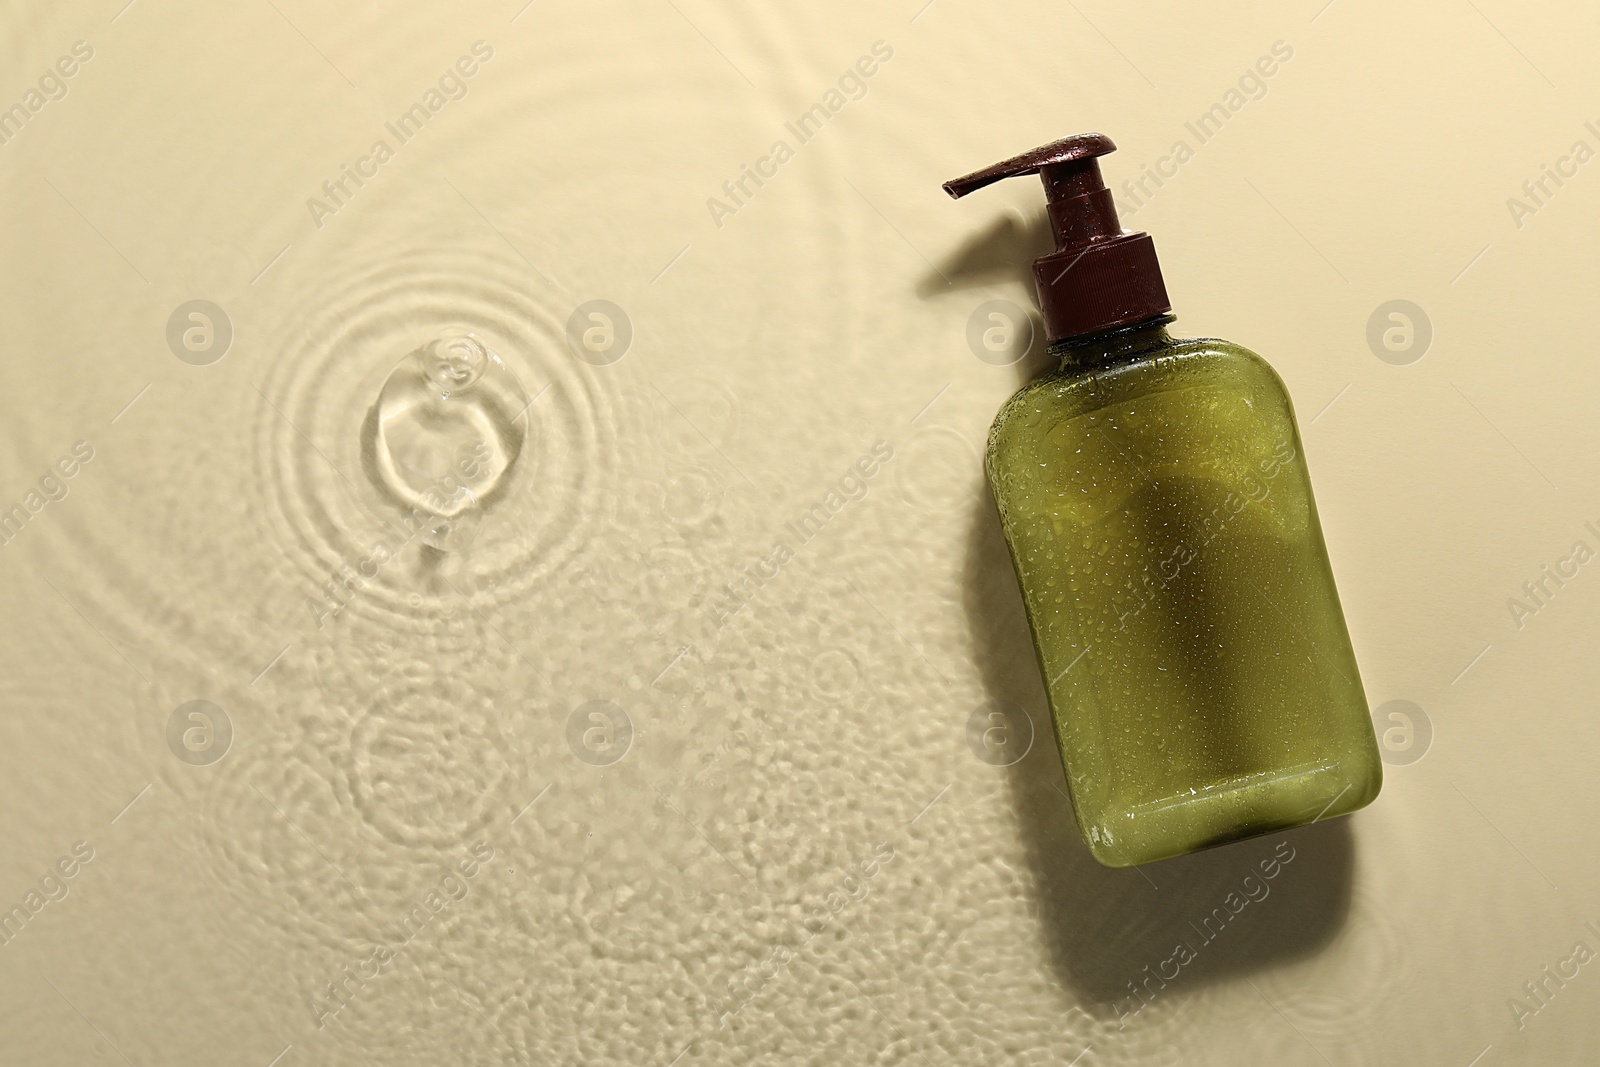 Photo of Bottle of face cleansing product in water against beige background, top view. Space for text